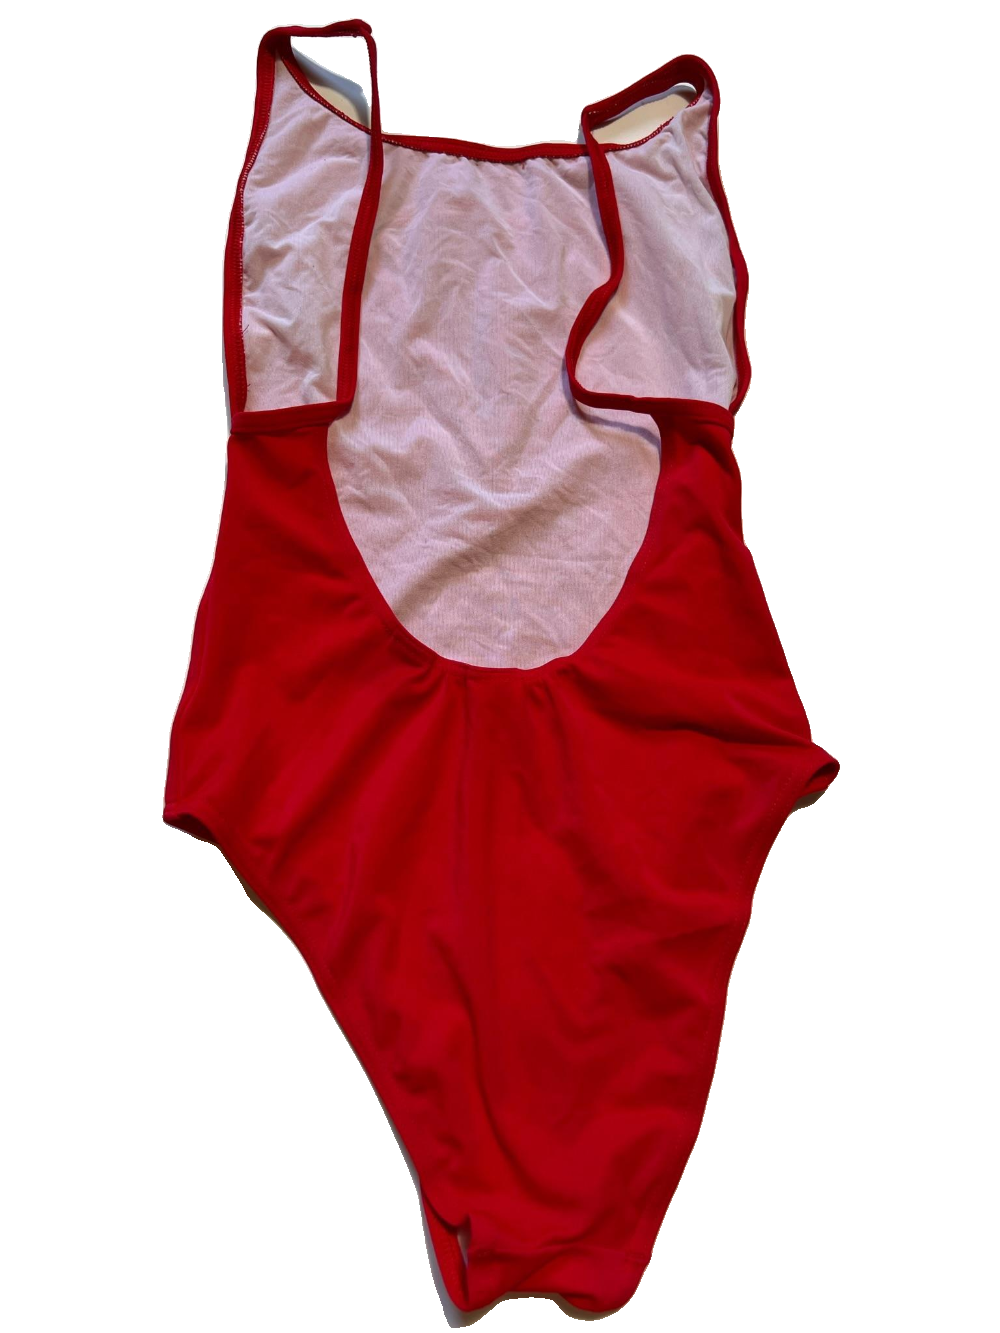 Guess - Red Logo Swimsuit